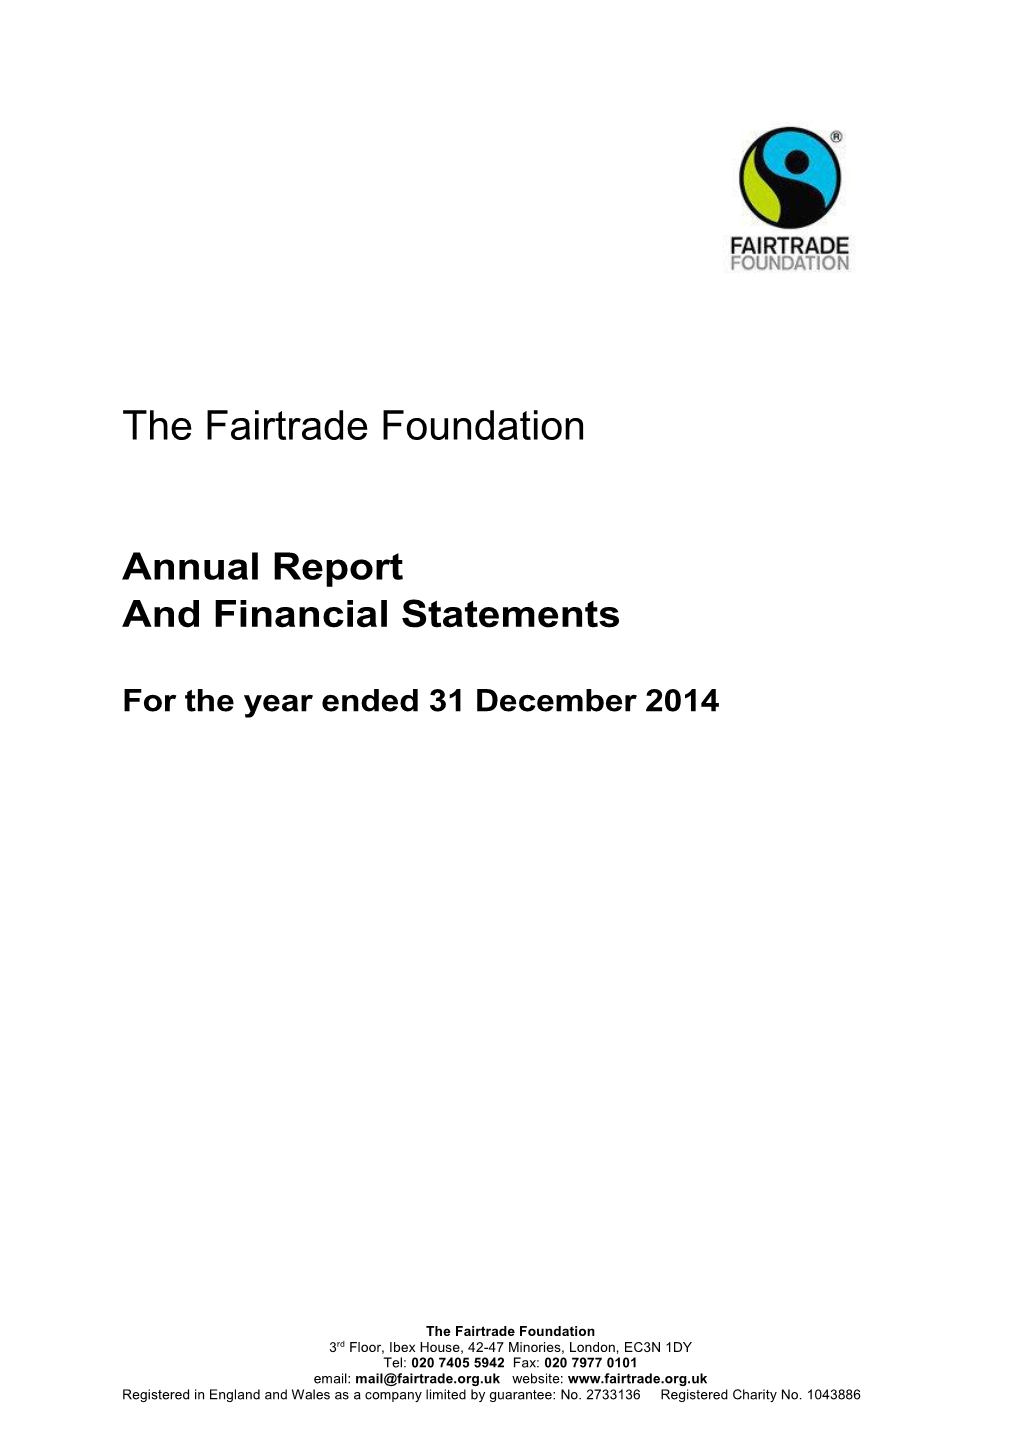 Download the 2014 Annual Report And